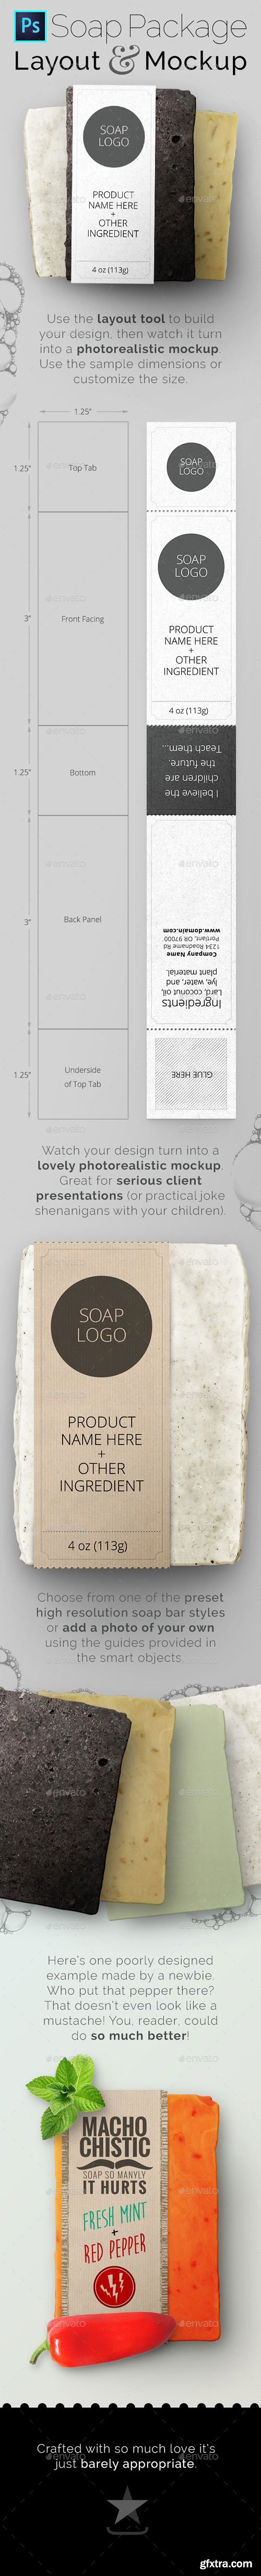 GraphicRiver - Soap Bar Package Tool and Mockup - 15955892